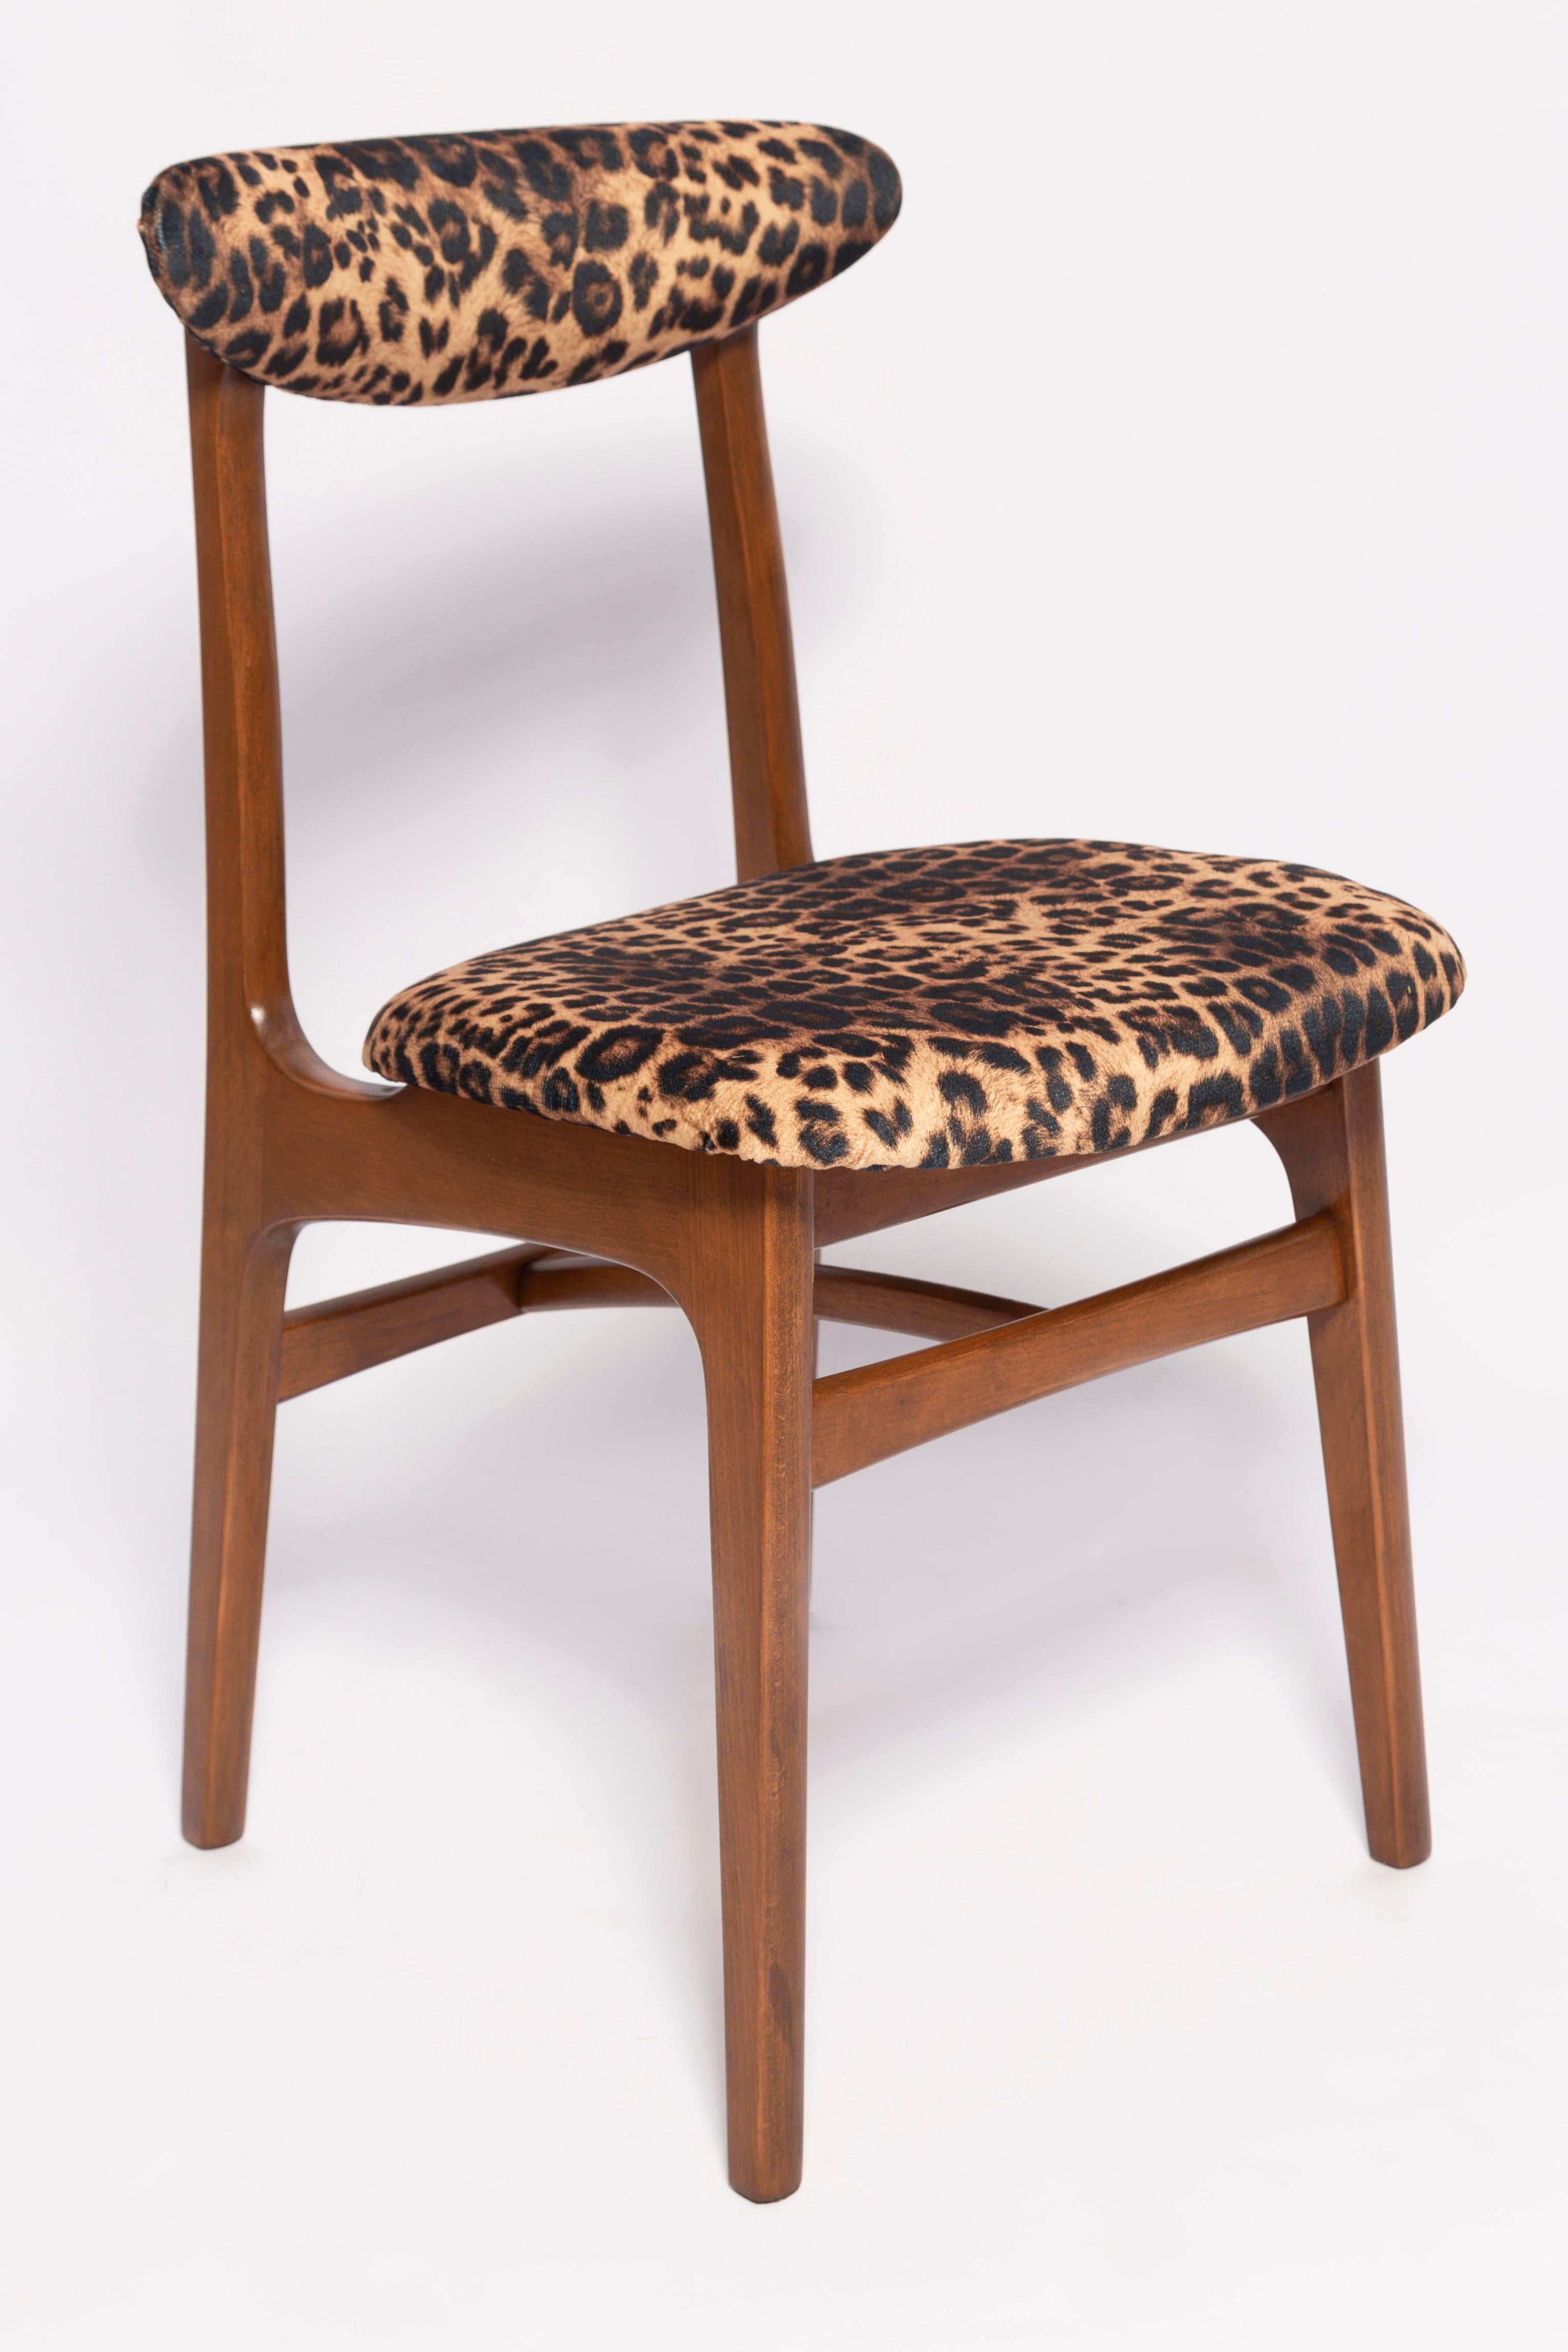 Chair designed by Prof. Rajmund Halas. Made of beechwood. Chair is after a complete upholstery renovation, the woodwork has been refreshed. Seat is dressed in leopard printed, durable and pleasant to the touch unique velvet fabric. Chair is stable